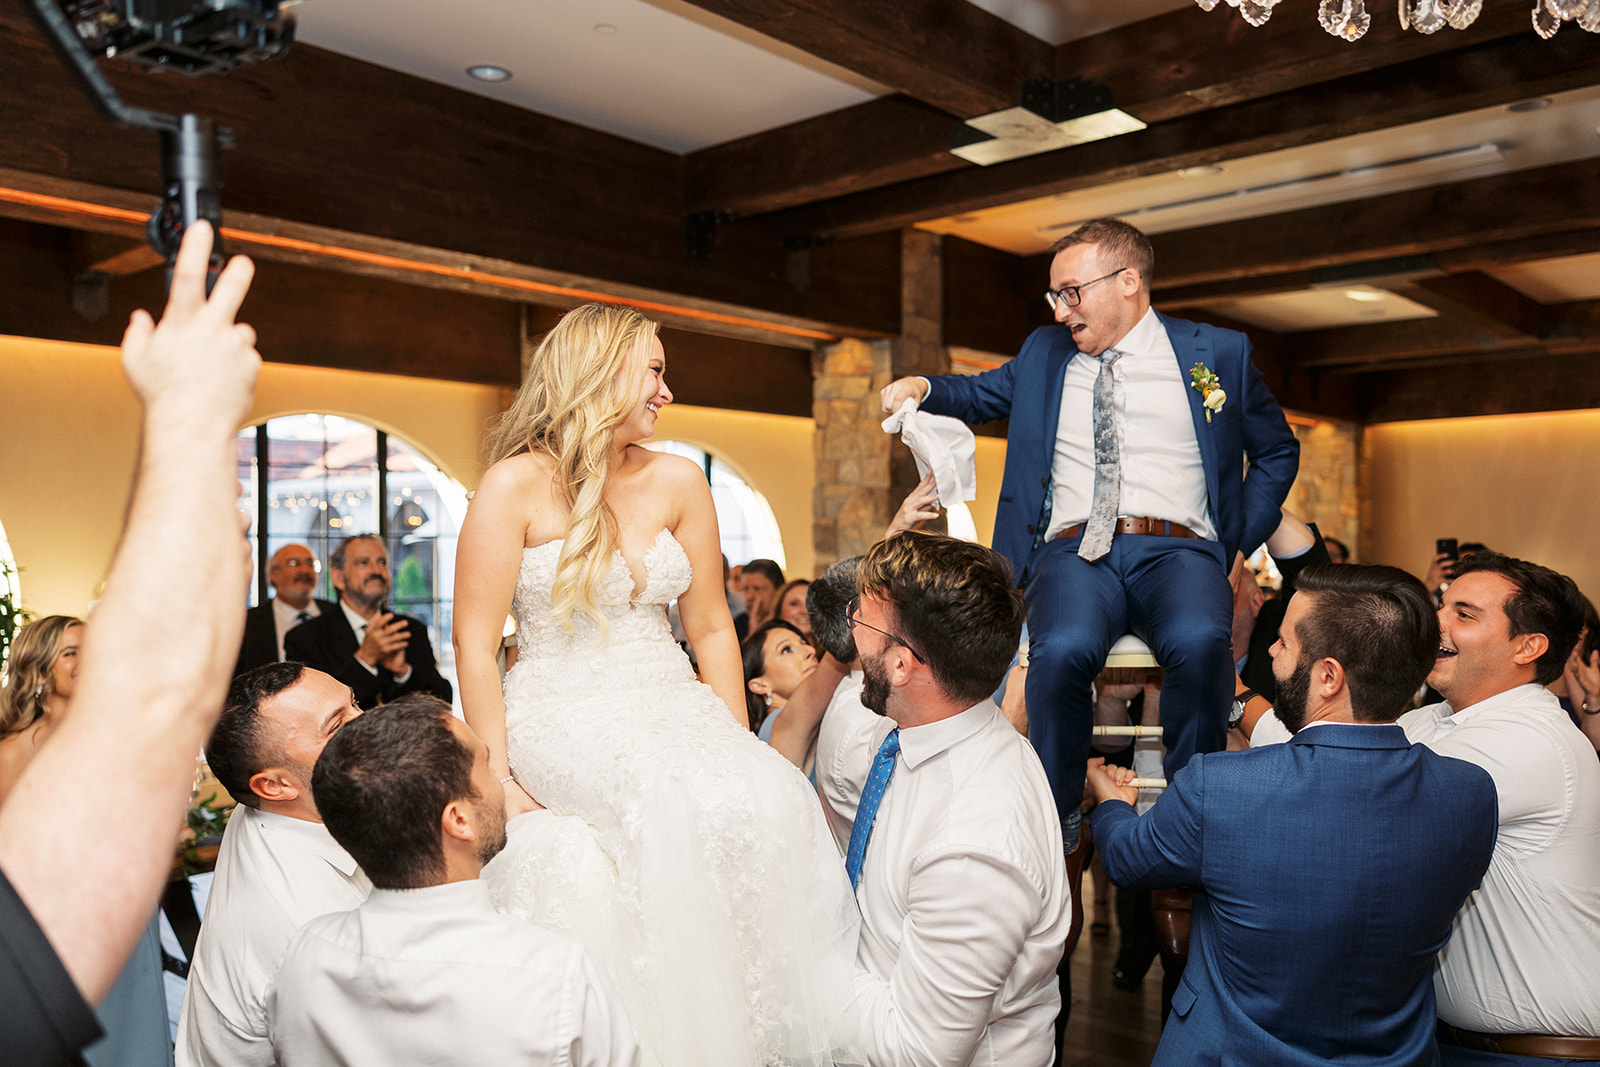 A bride and groom are lifted while sitting on chairs at their The Reserve At Perona Farms wedding reception